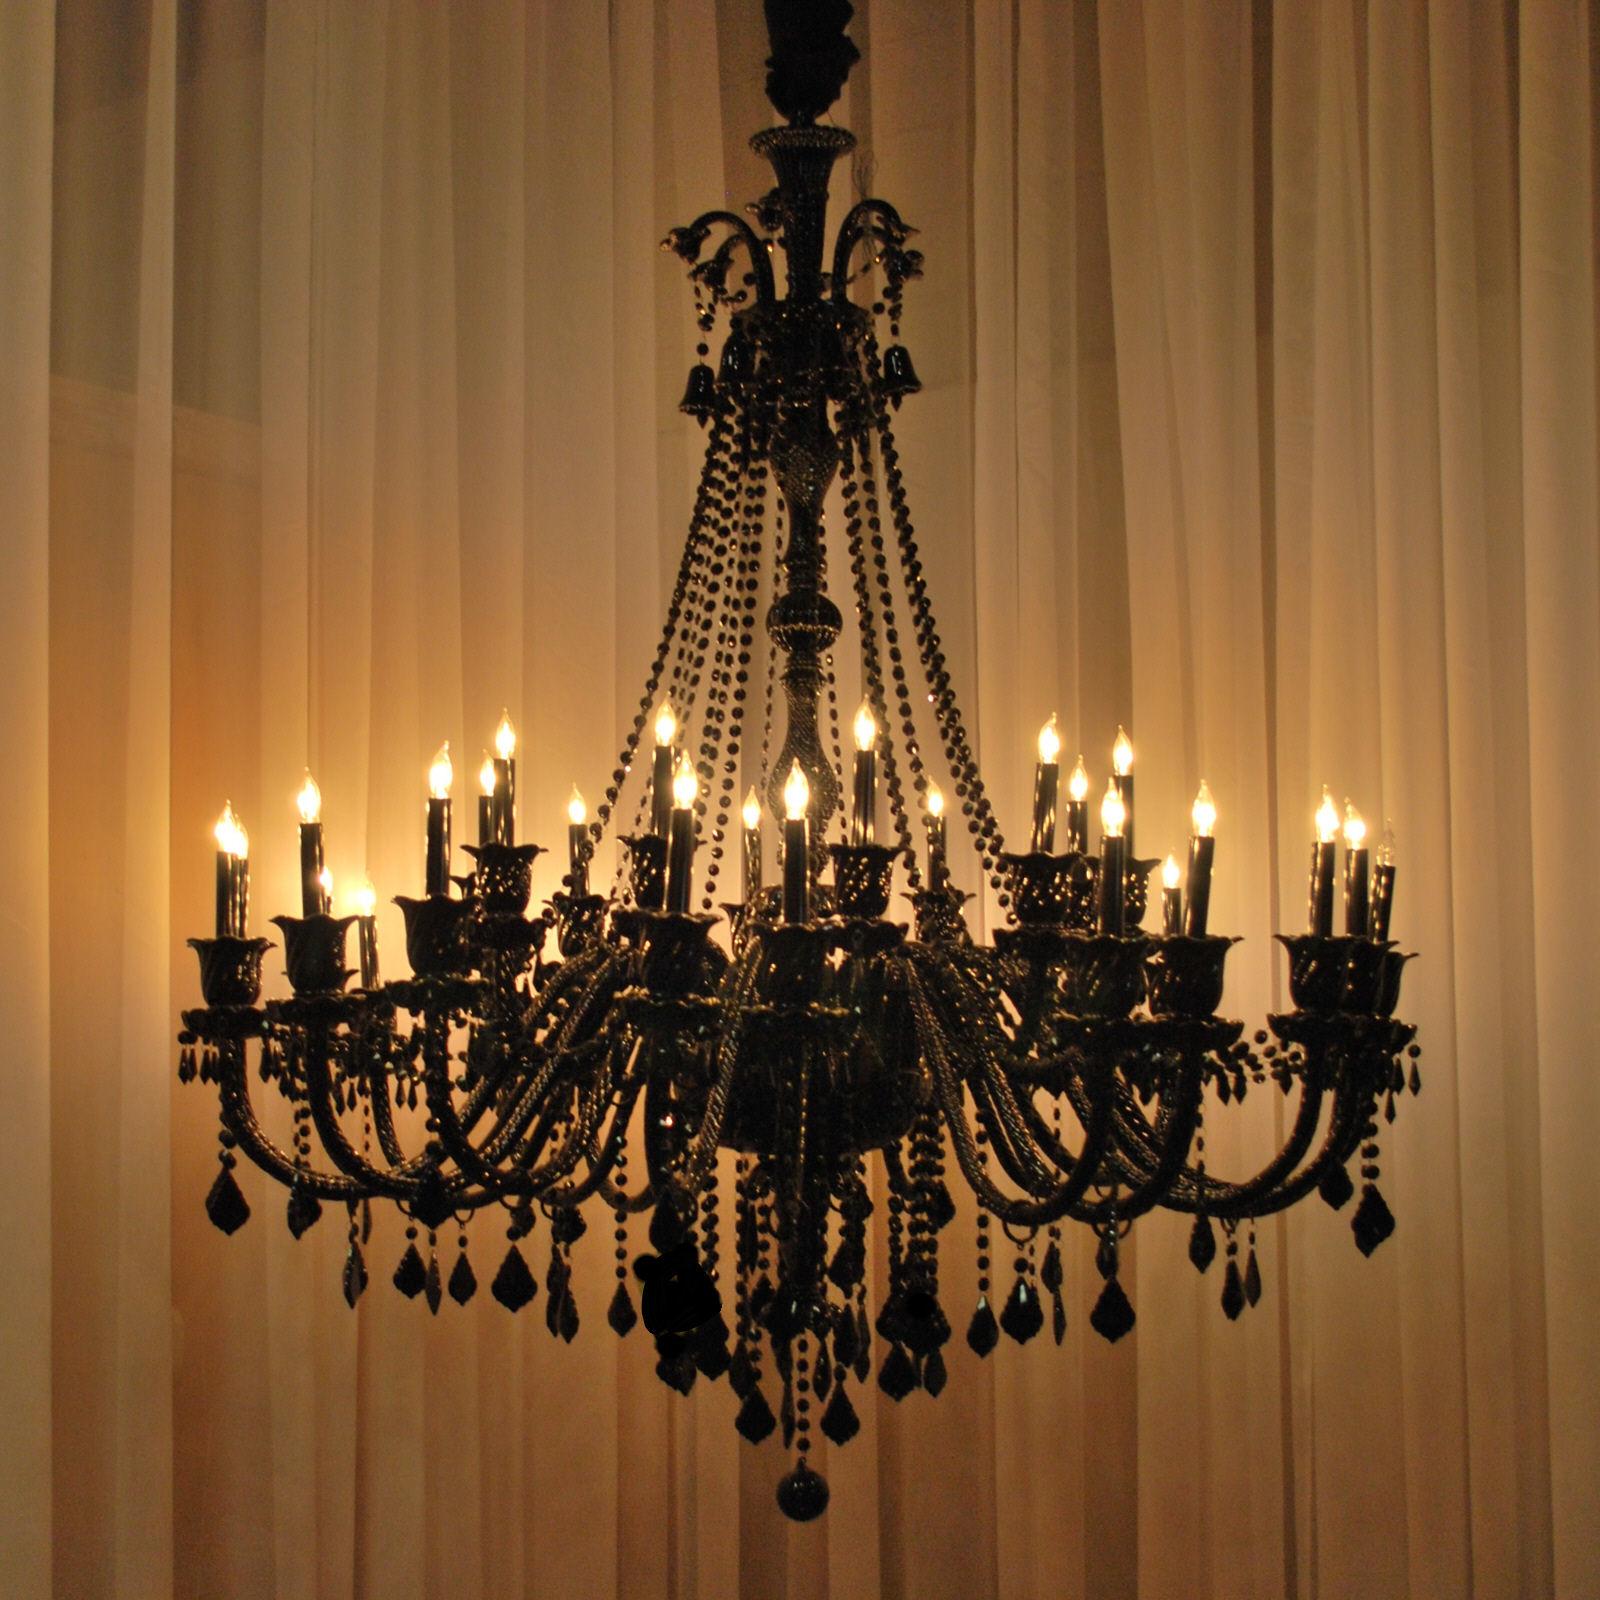 How to Adorn Your Home with Chandeliers - furnitureanddecors.com/decor